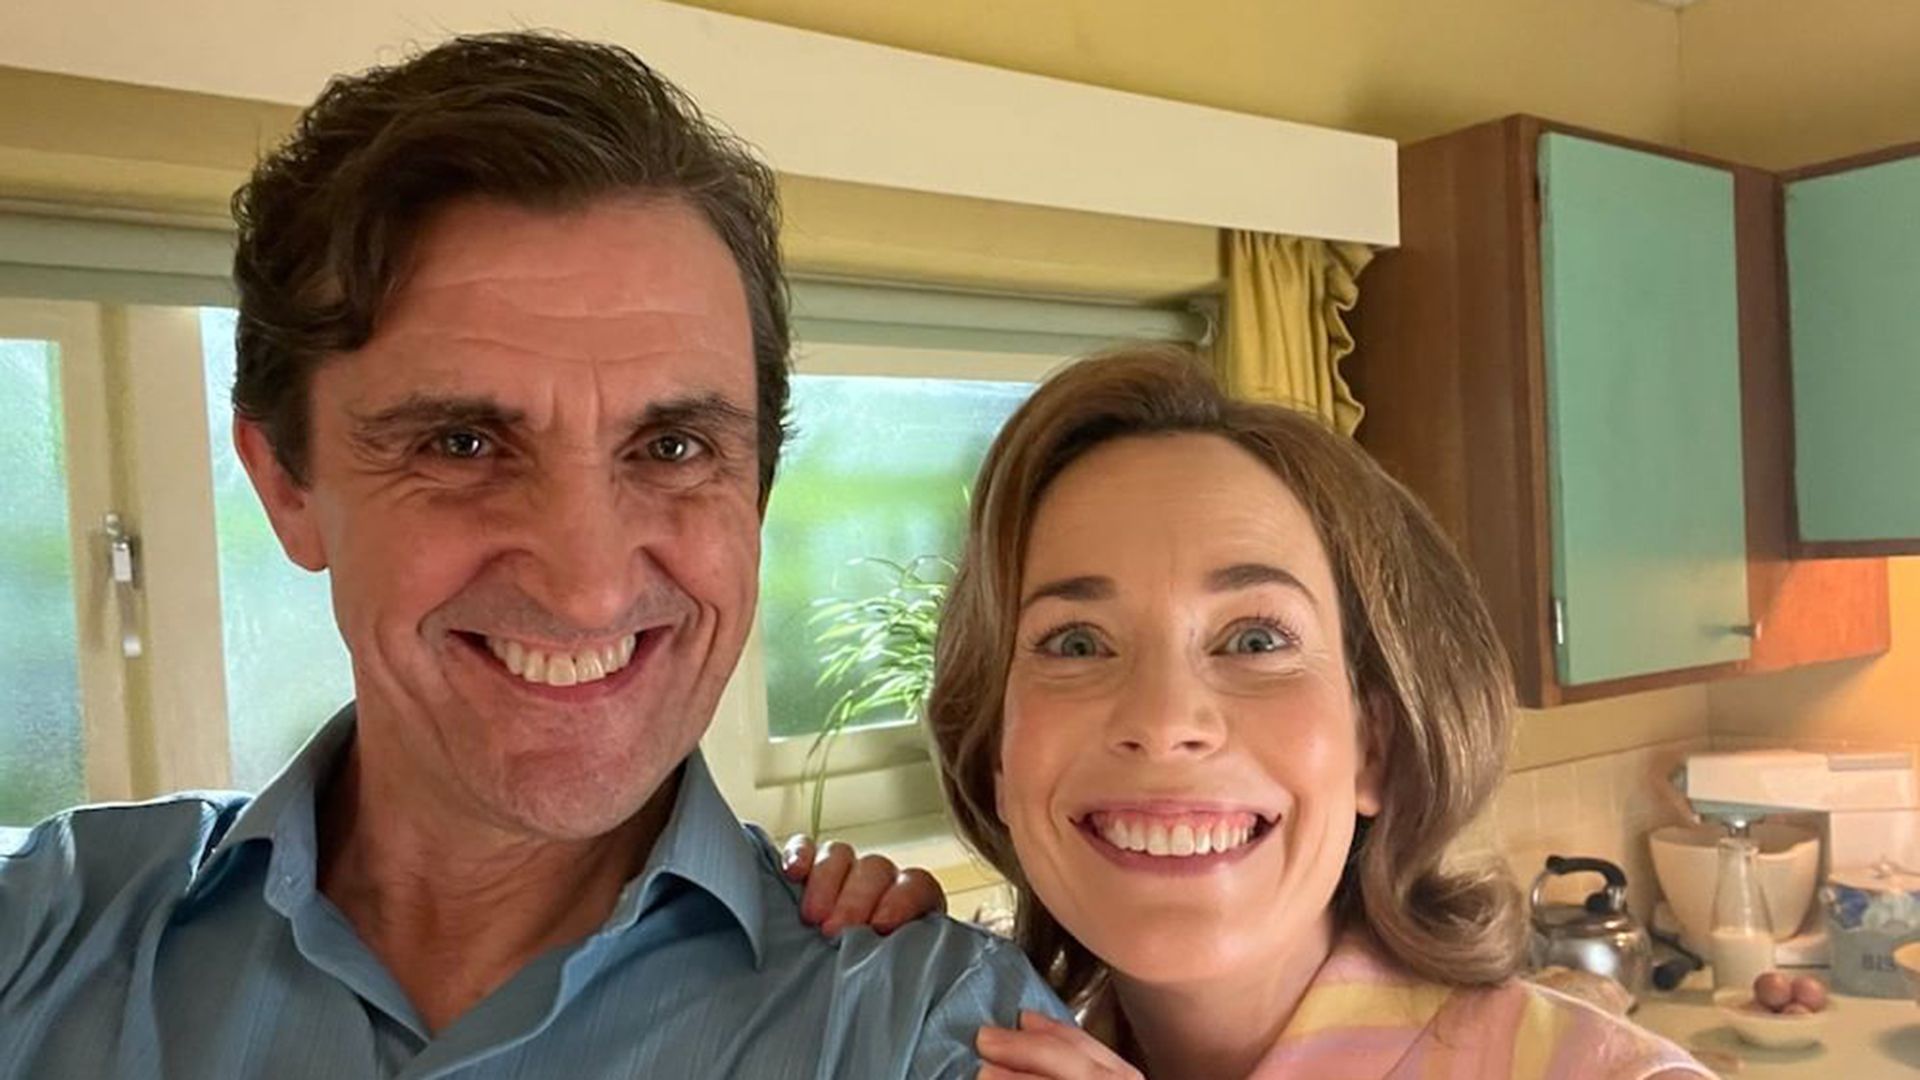 Call The Midwife stars Stephen McGann and Laura Main selfie on set 